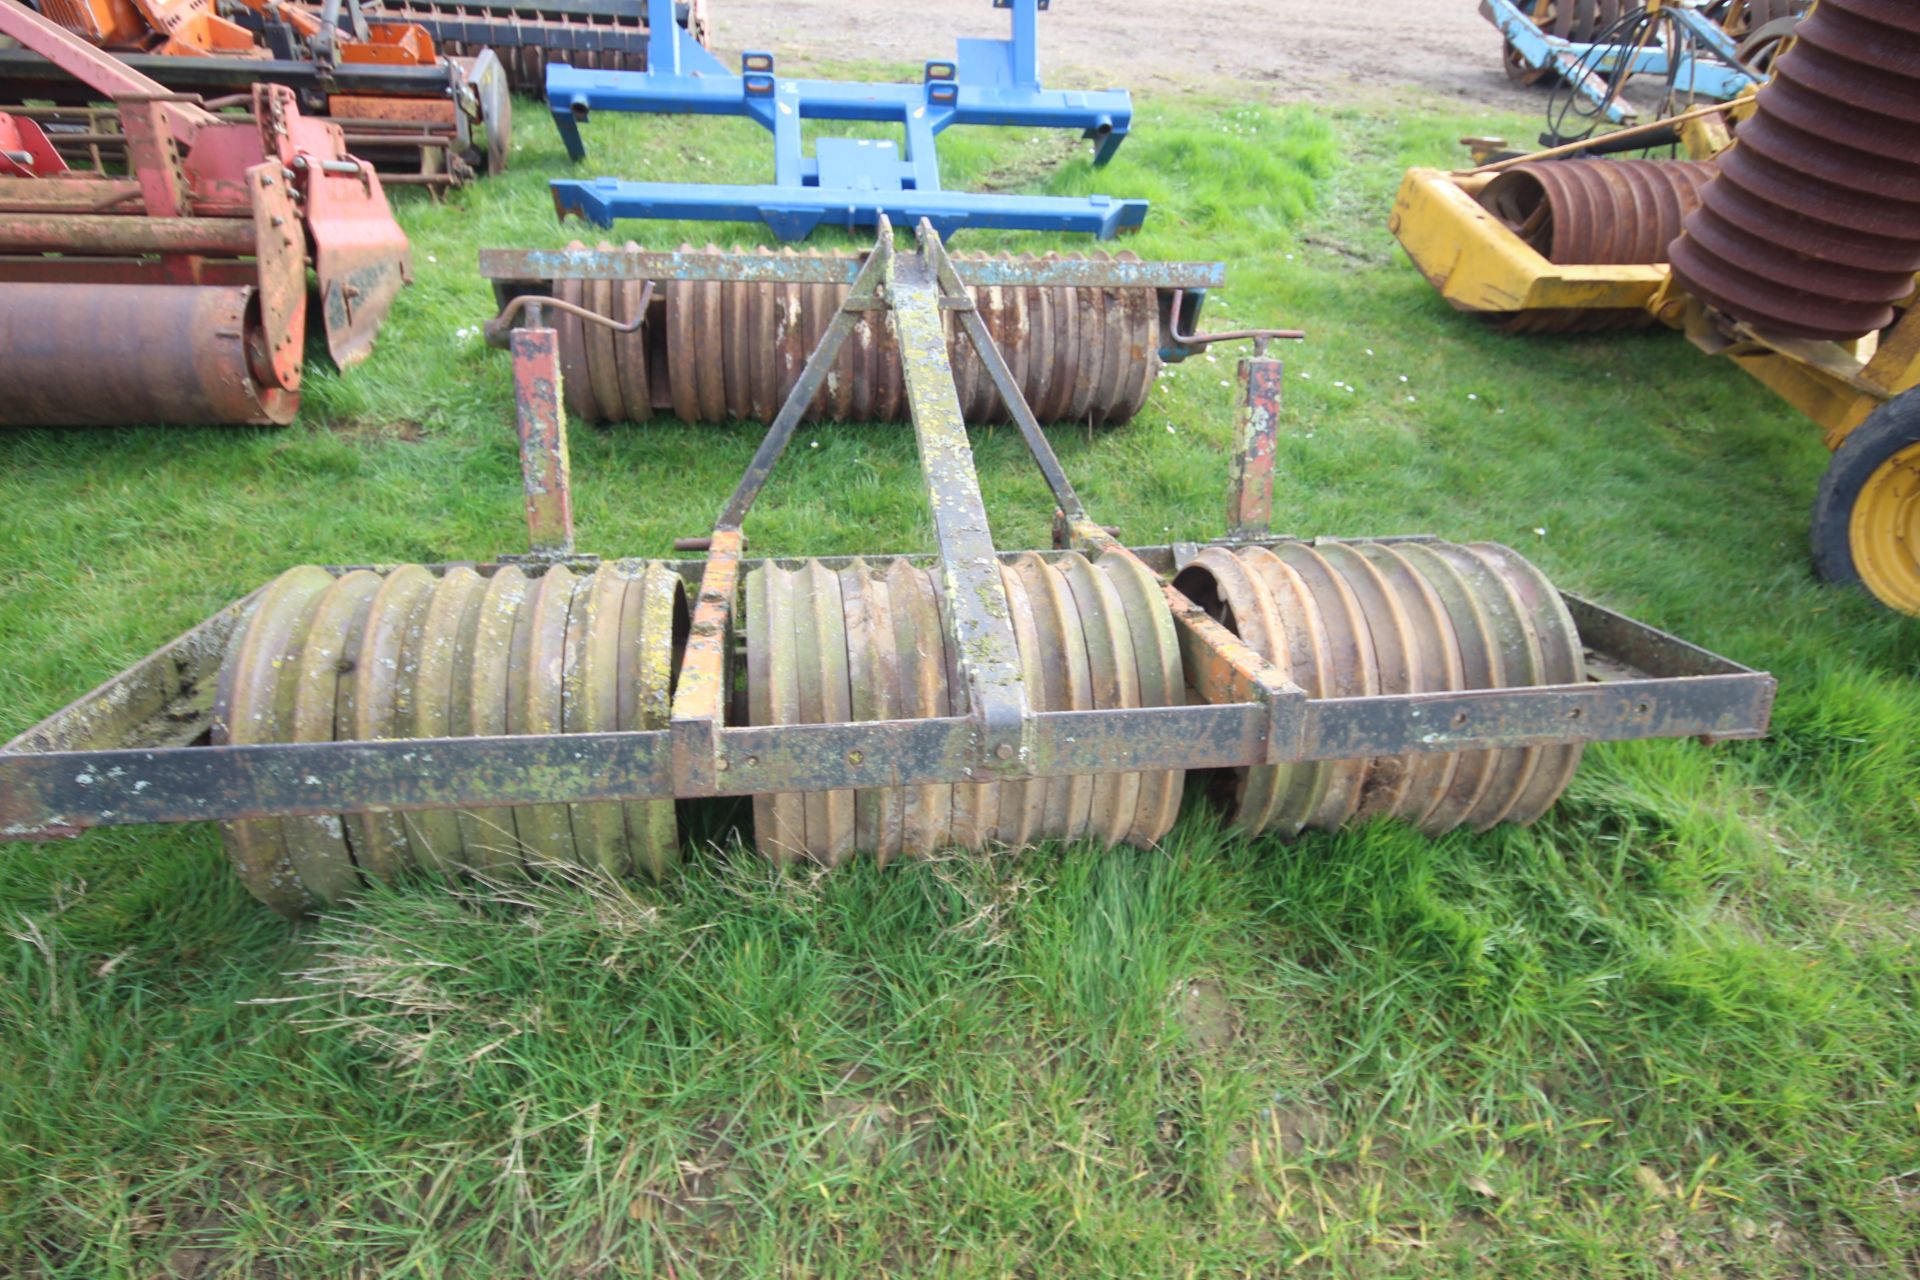 Linkage mounted Cambridge roll. For sale due to retirement. V - Image 5 of 9